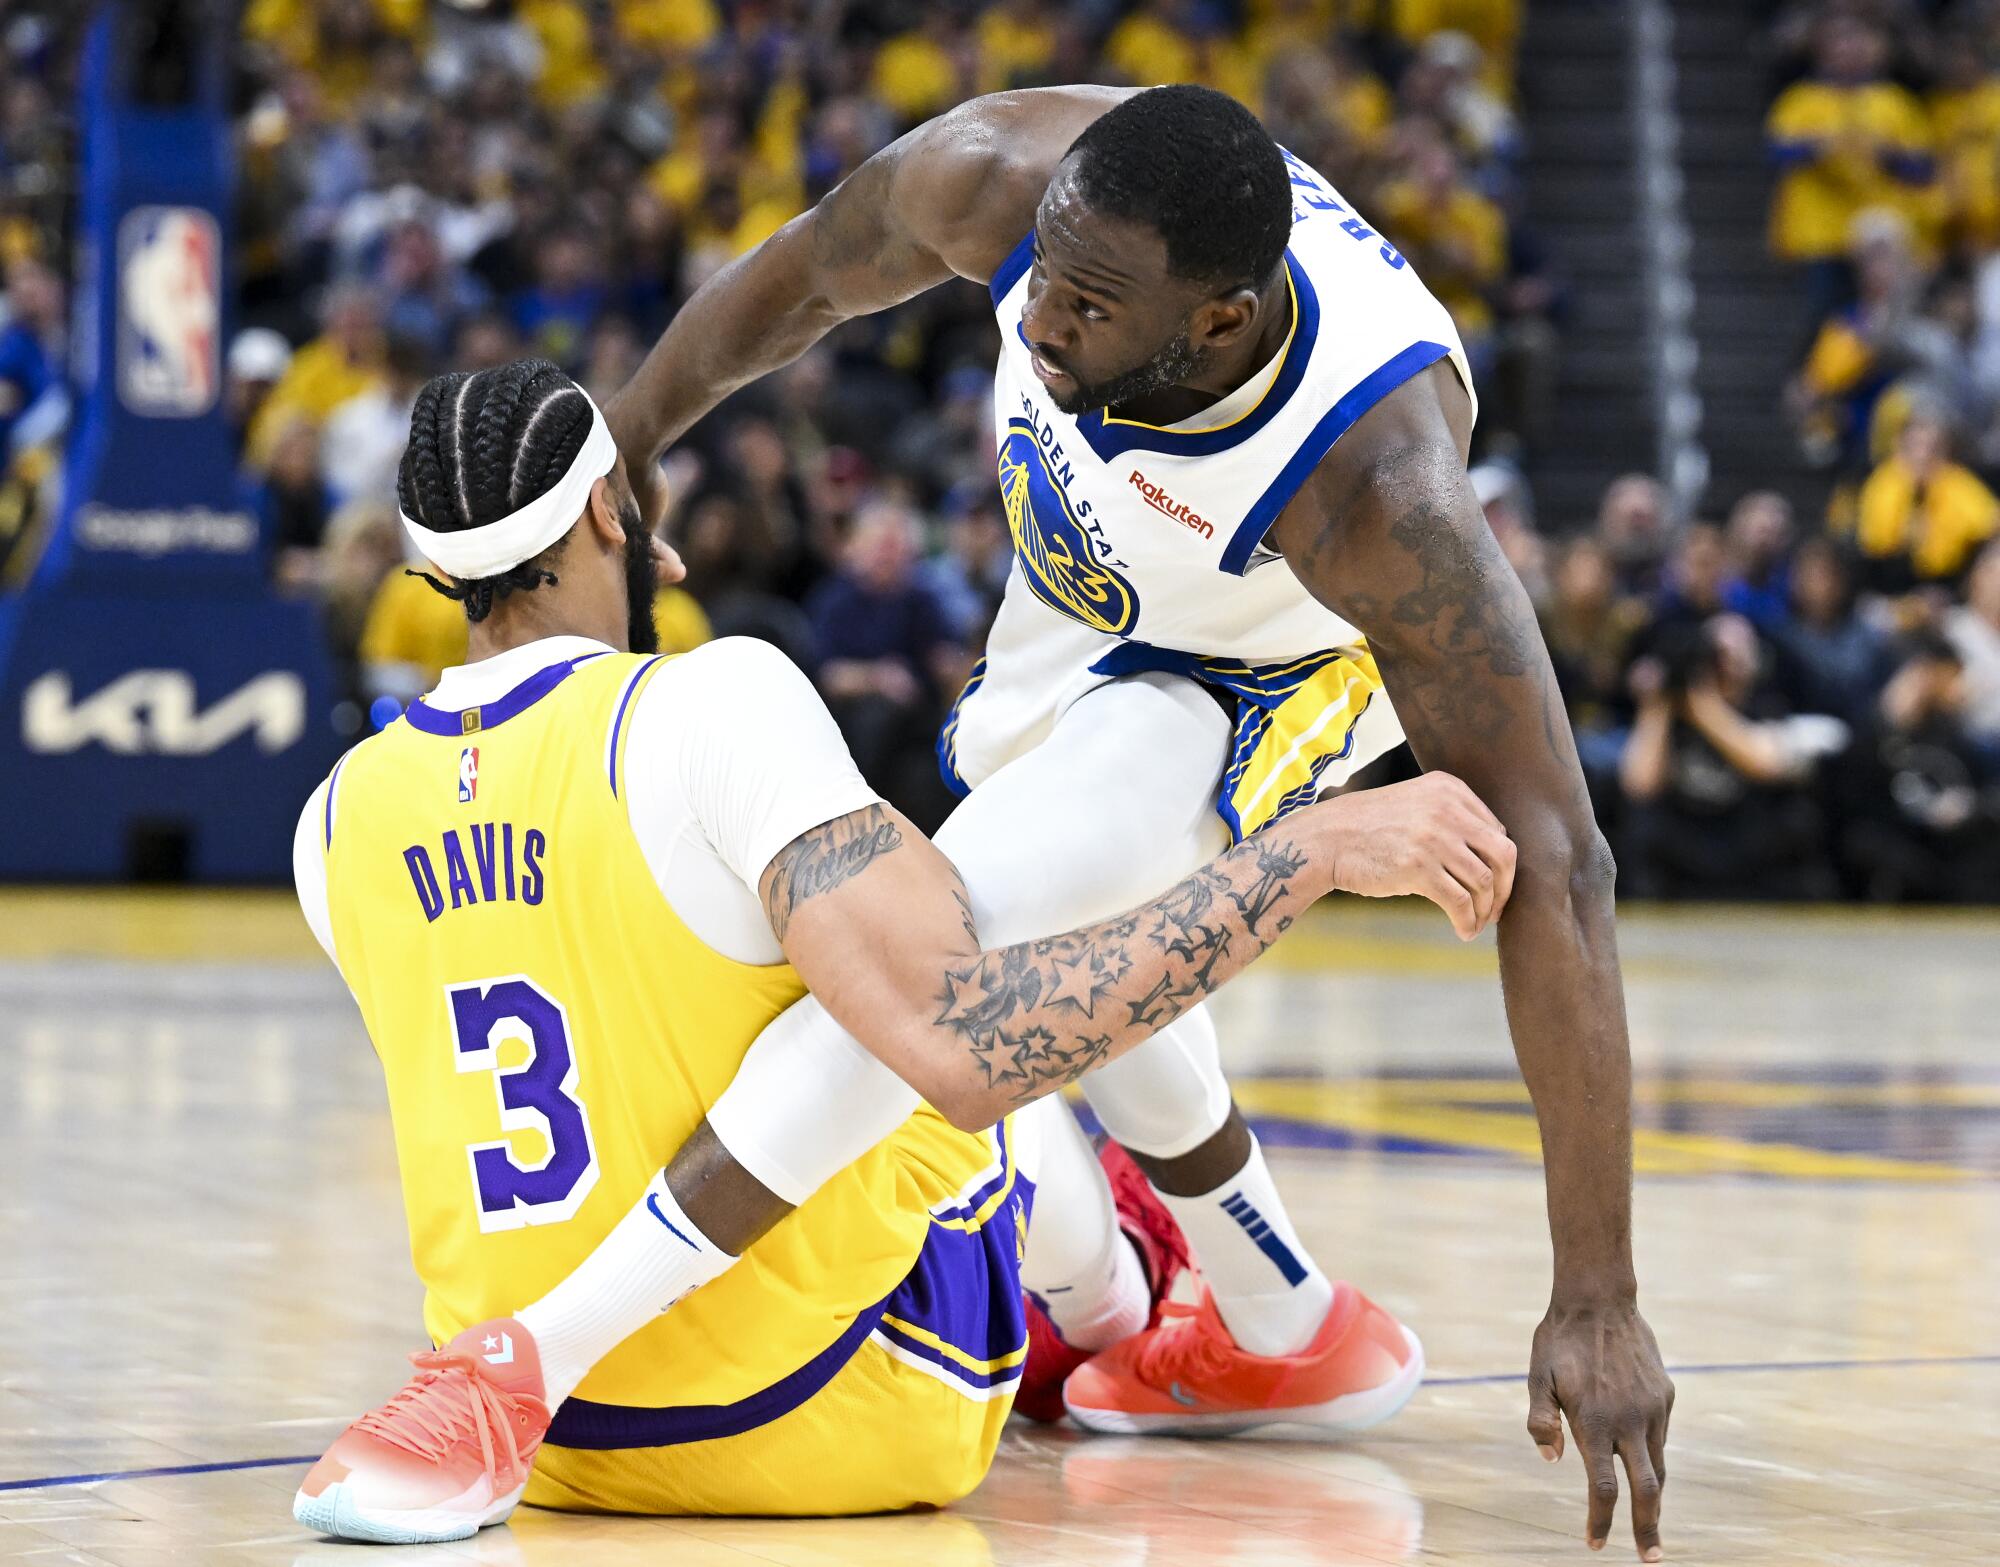 Lakers forward Anthony Davis and Warriors forward Draymond Green get tangled on the court.